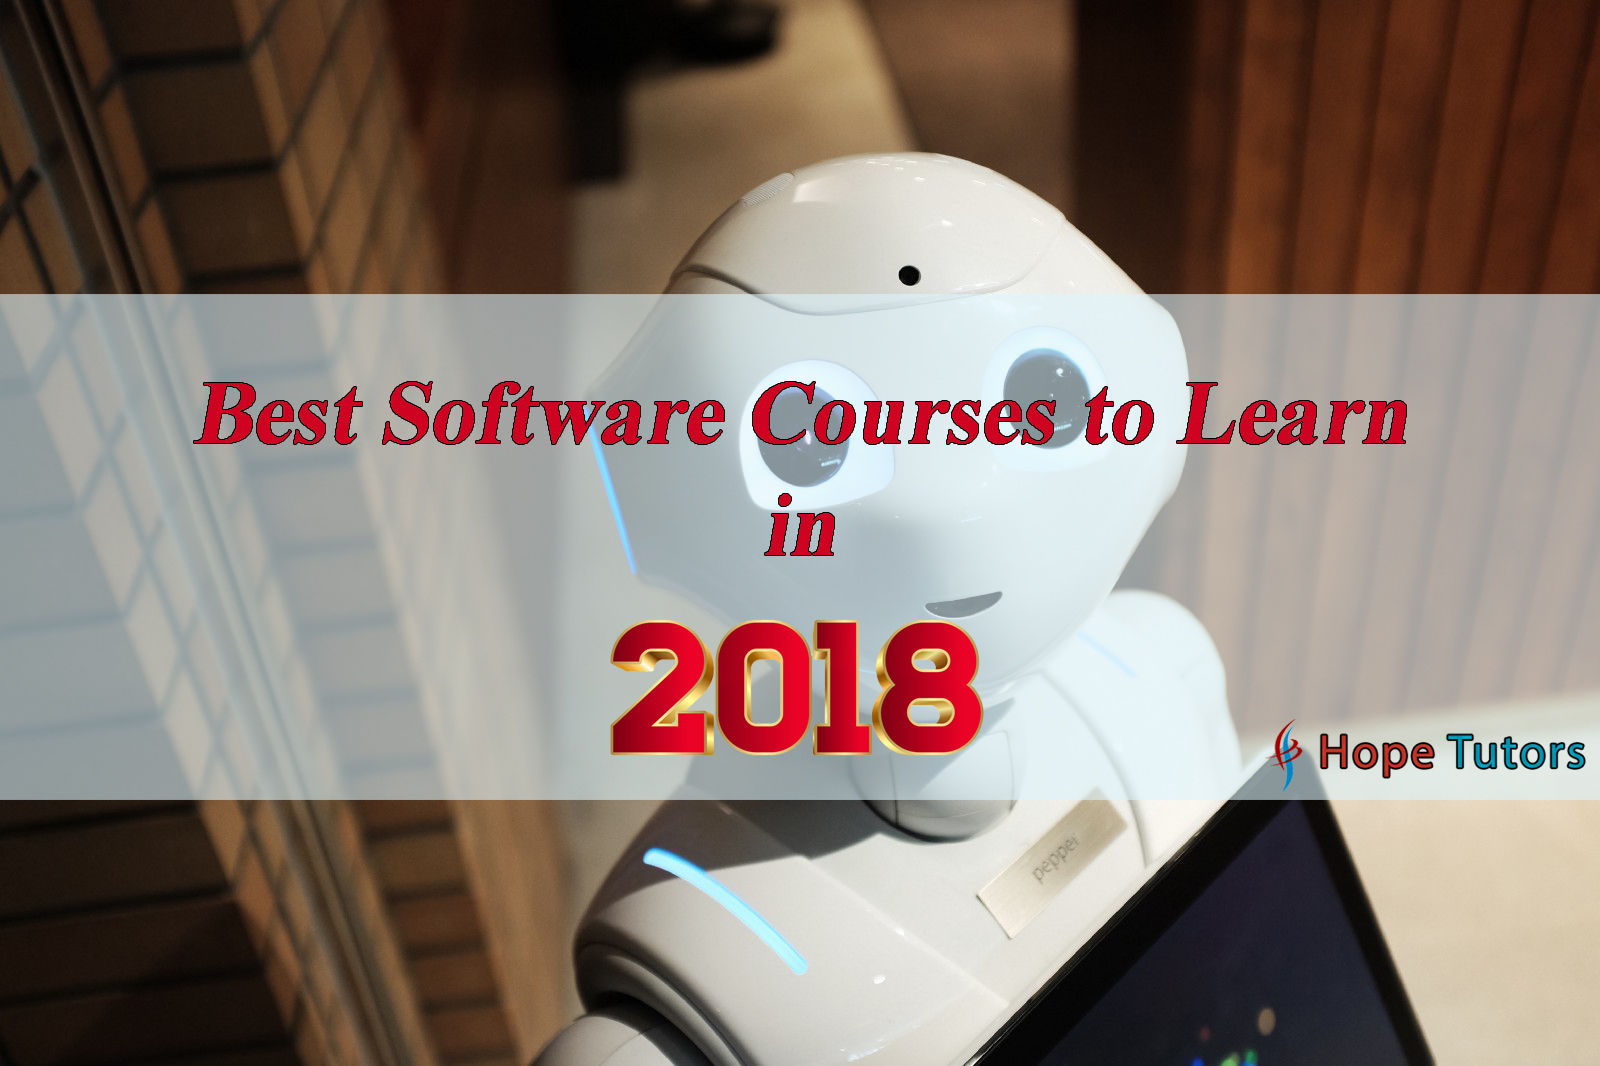 Best Software Courses to Learn in 2018